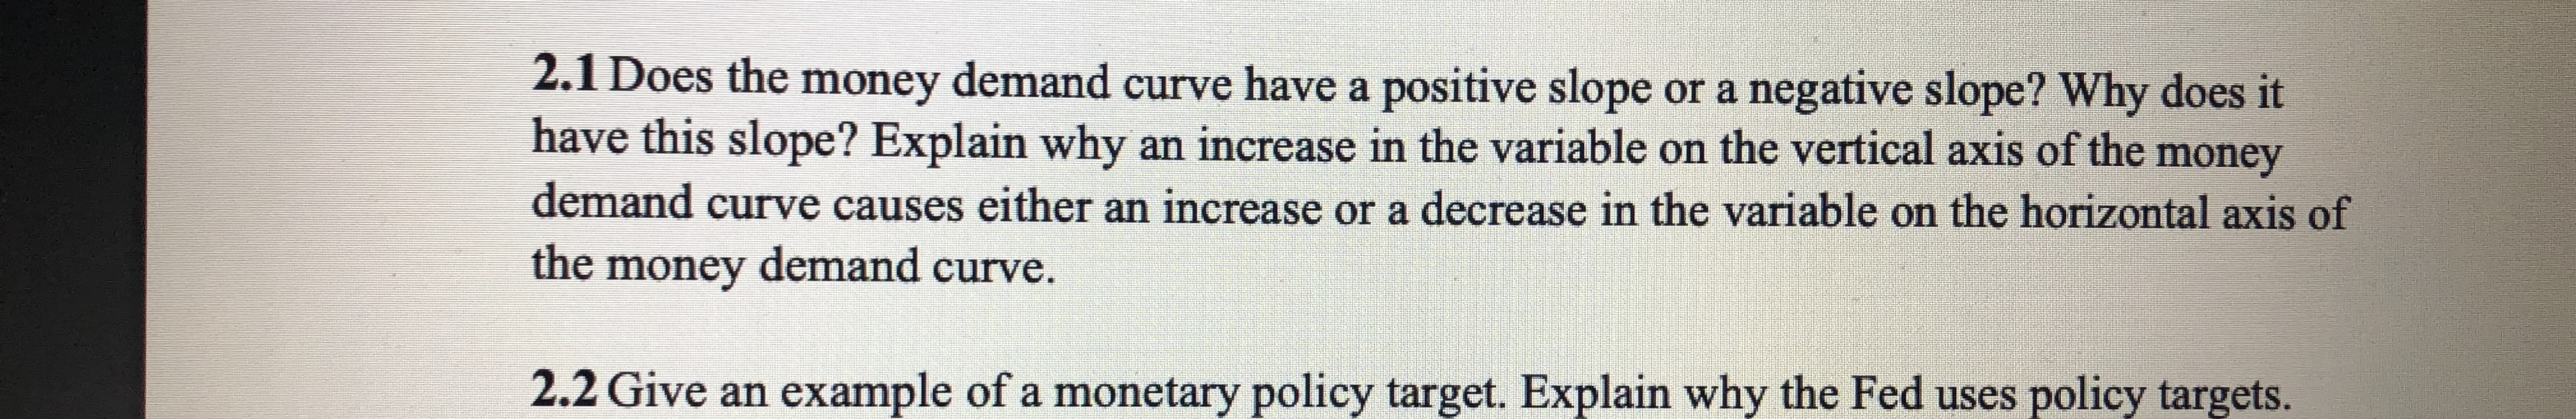 2.1 Does the money demand curve have a positive slope ora negative slope? Why does it
have this slope? Explain why an increase in the variable on the vertical axis of the money
demand curve causes either an increase or a decrease in the variable on the horizontal axis of
the money demand curve.
2.2 Give an example of a monetary policy target. Explain why the Fed uses policy targets.
